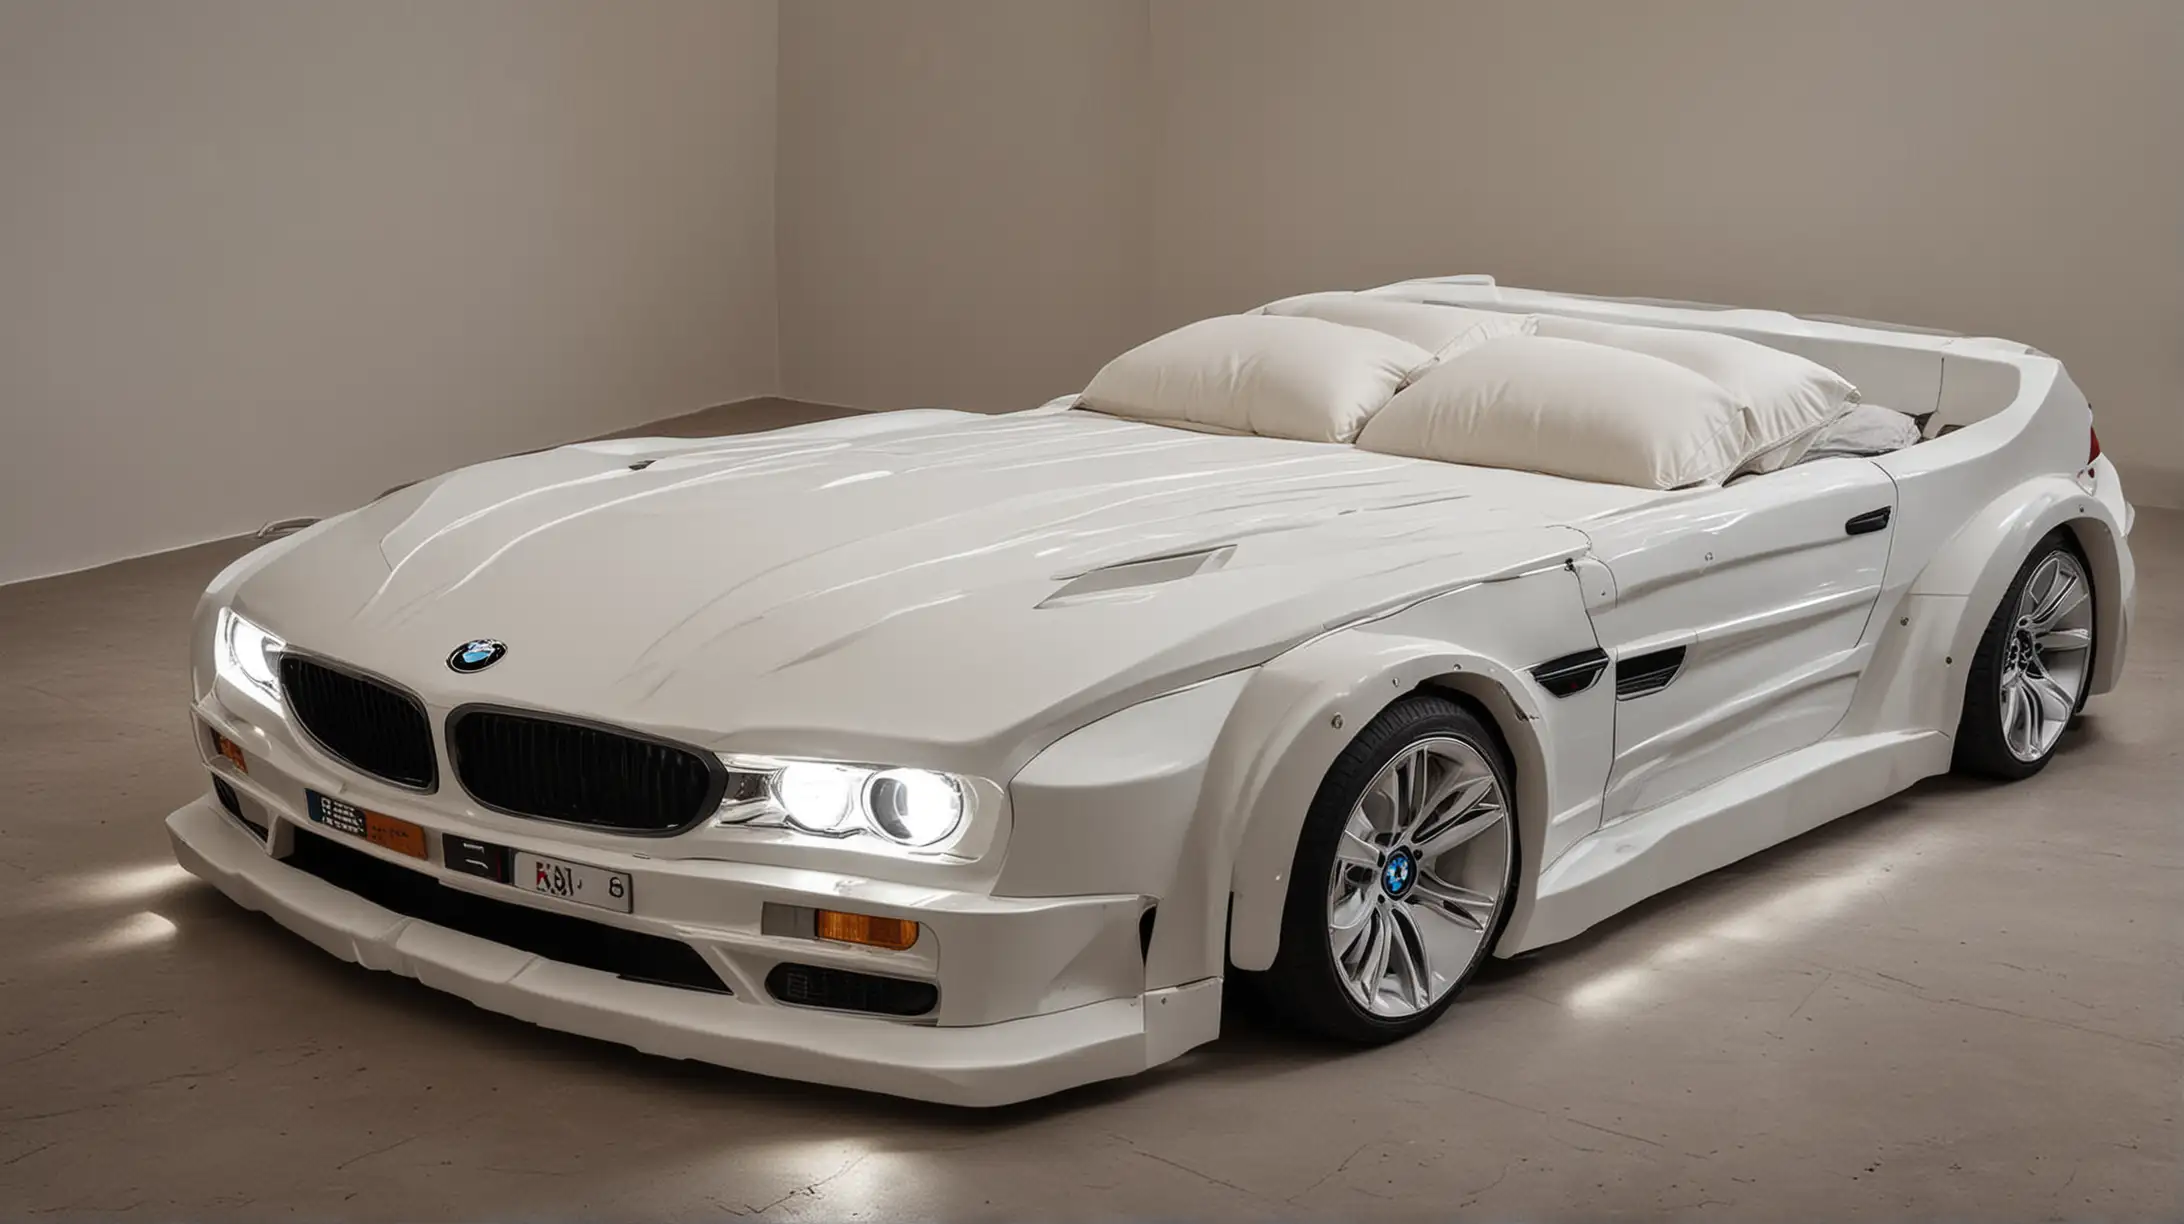 BMW Car Shaped Double Bed with Headlights On